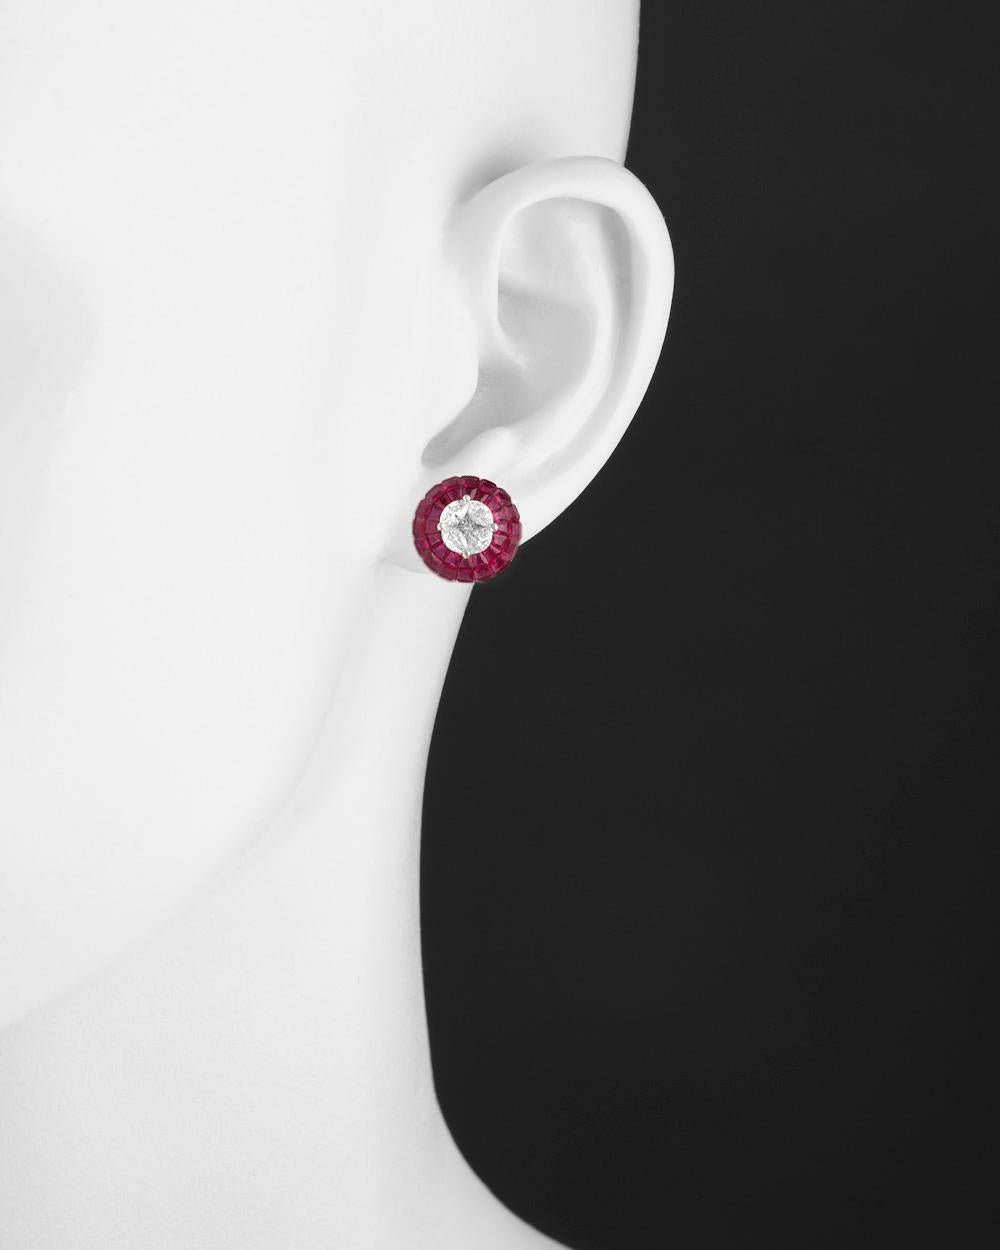 Domed stud earrings, centering a princess-cut diamond framed by four marquise-shaped diamonds within an invisibly-set calibre-cut ruby dome, in 18k white gold. Rubies weighing 12.25 total carats and diamonds weighing 0.80 total carats. Posts with